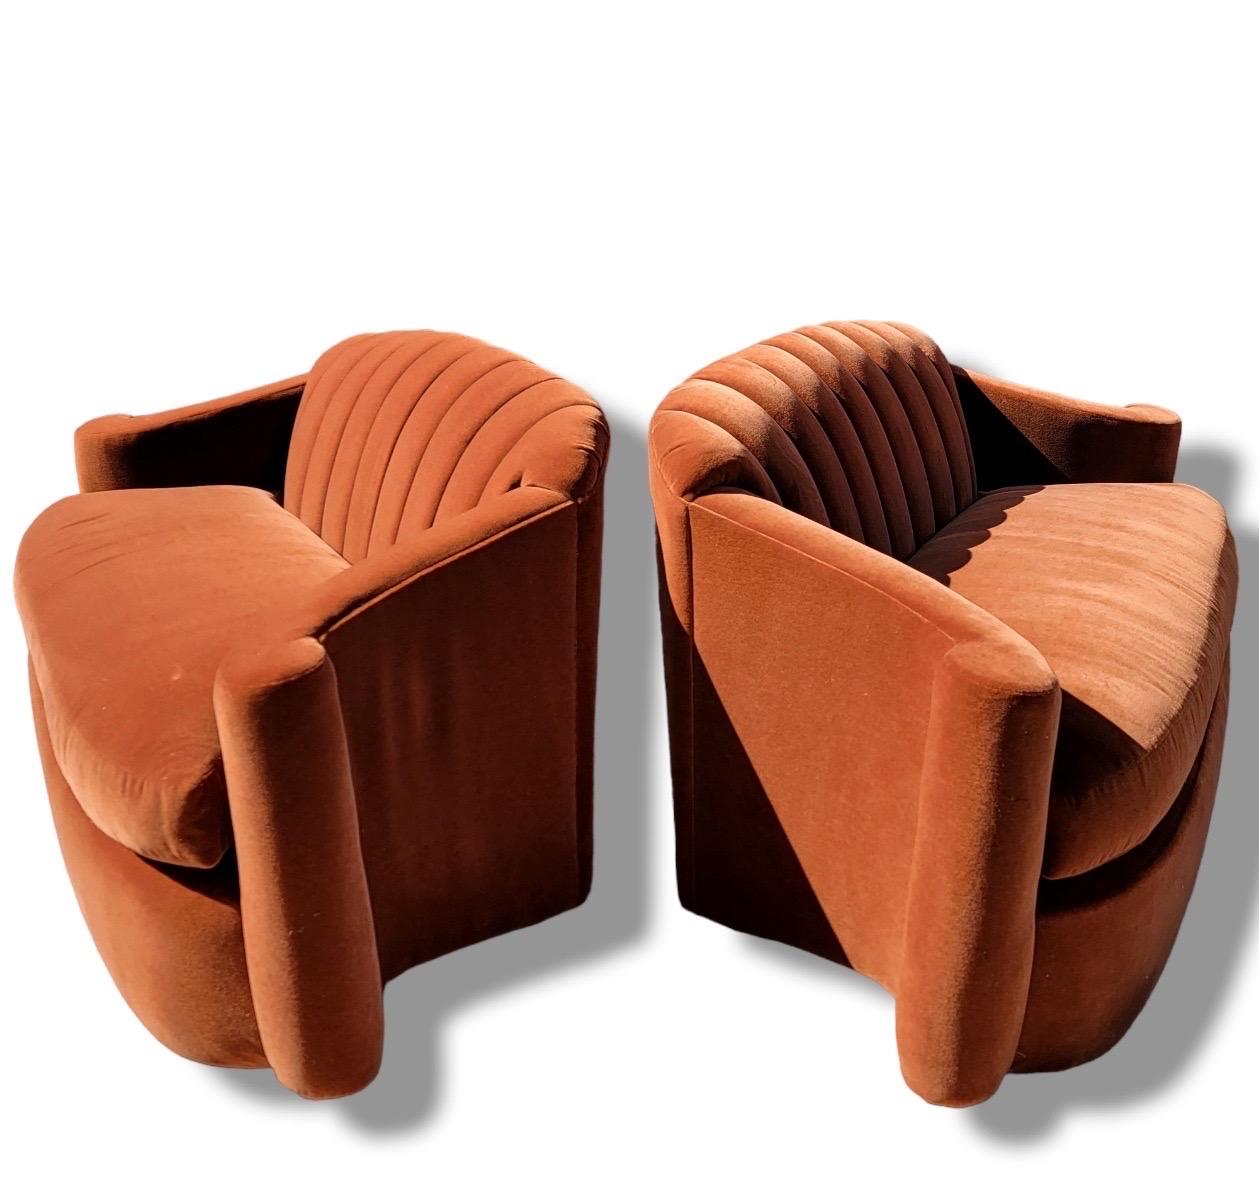 Late 20th Century Mid-Century Modern Loveseats by Larry Laslo for Directional, Pair For Sale